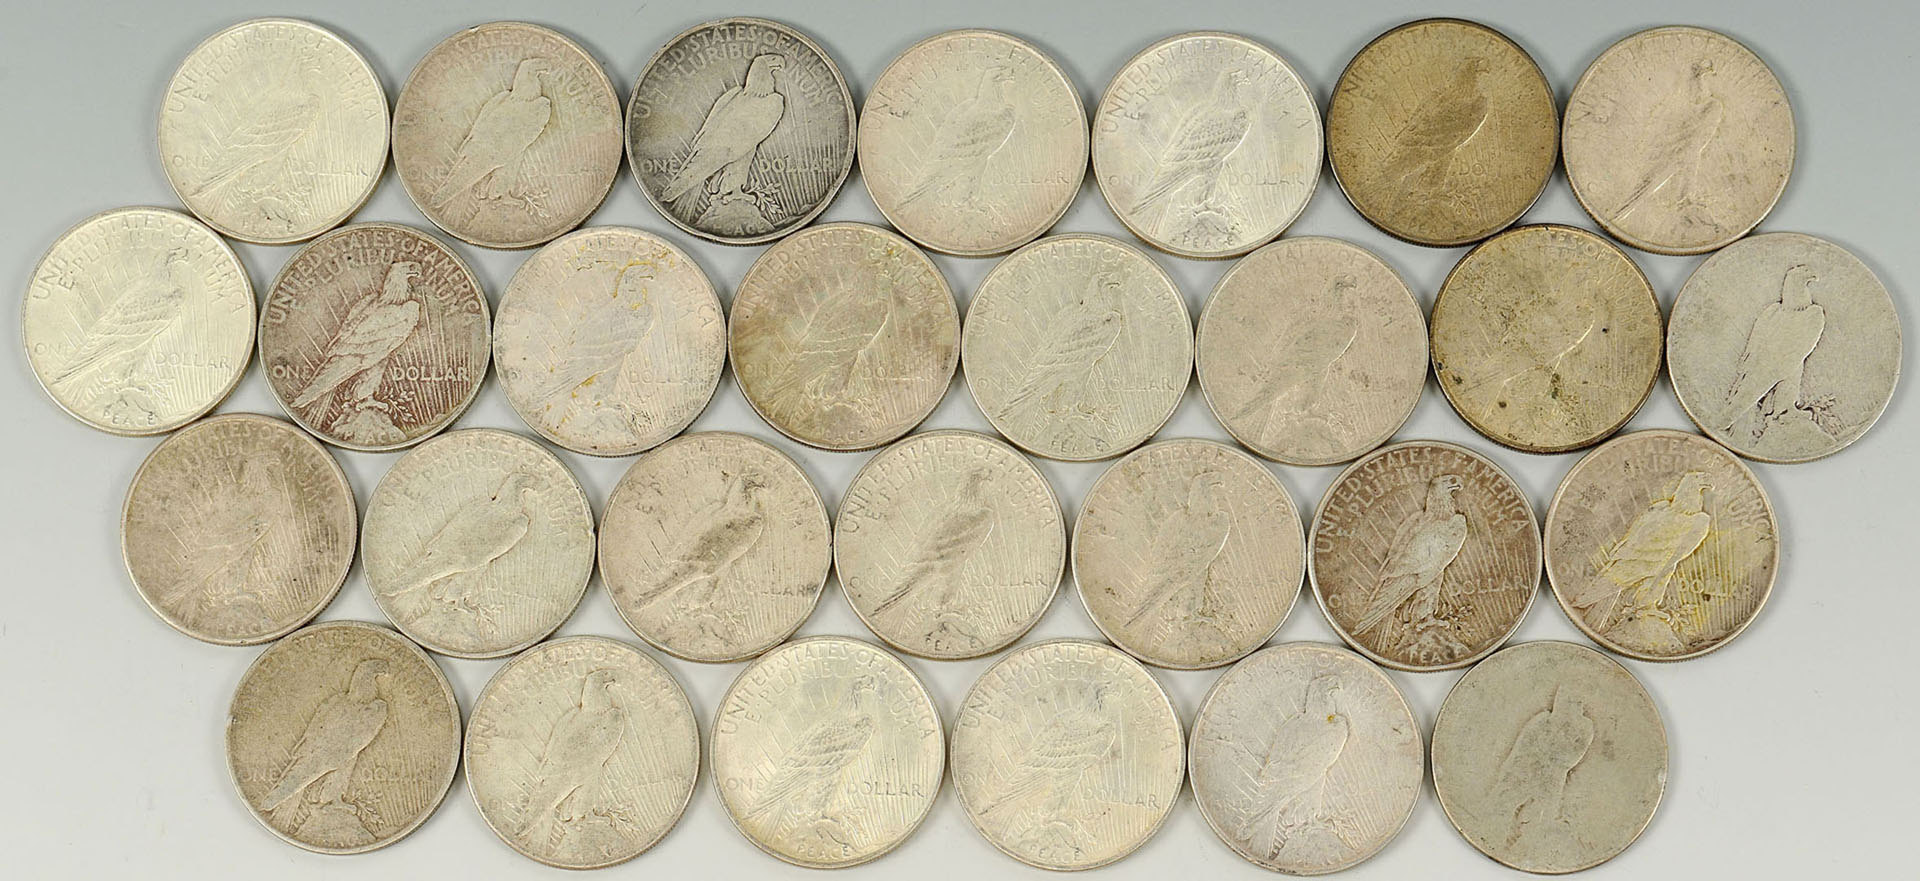 Lot 526: Grouping of 28 Peace Silver Dollars